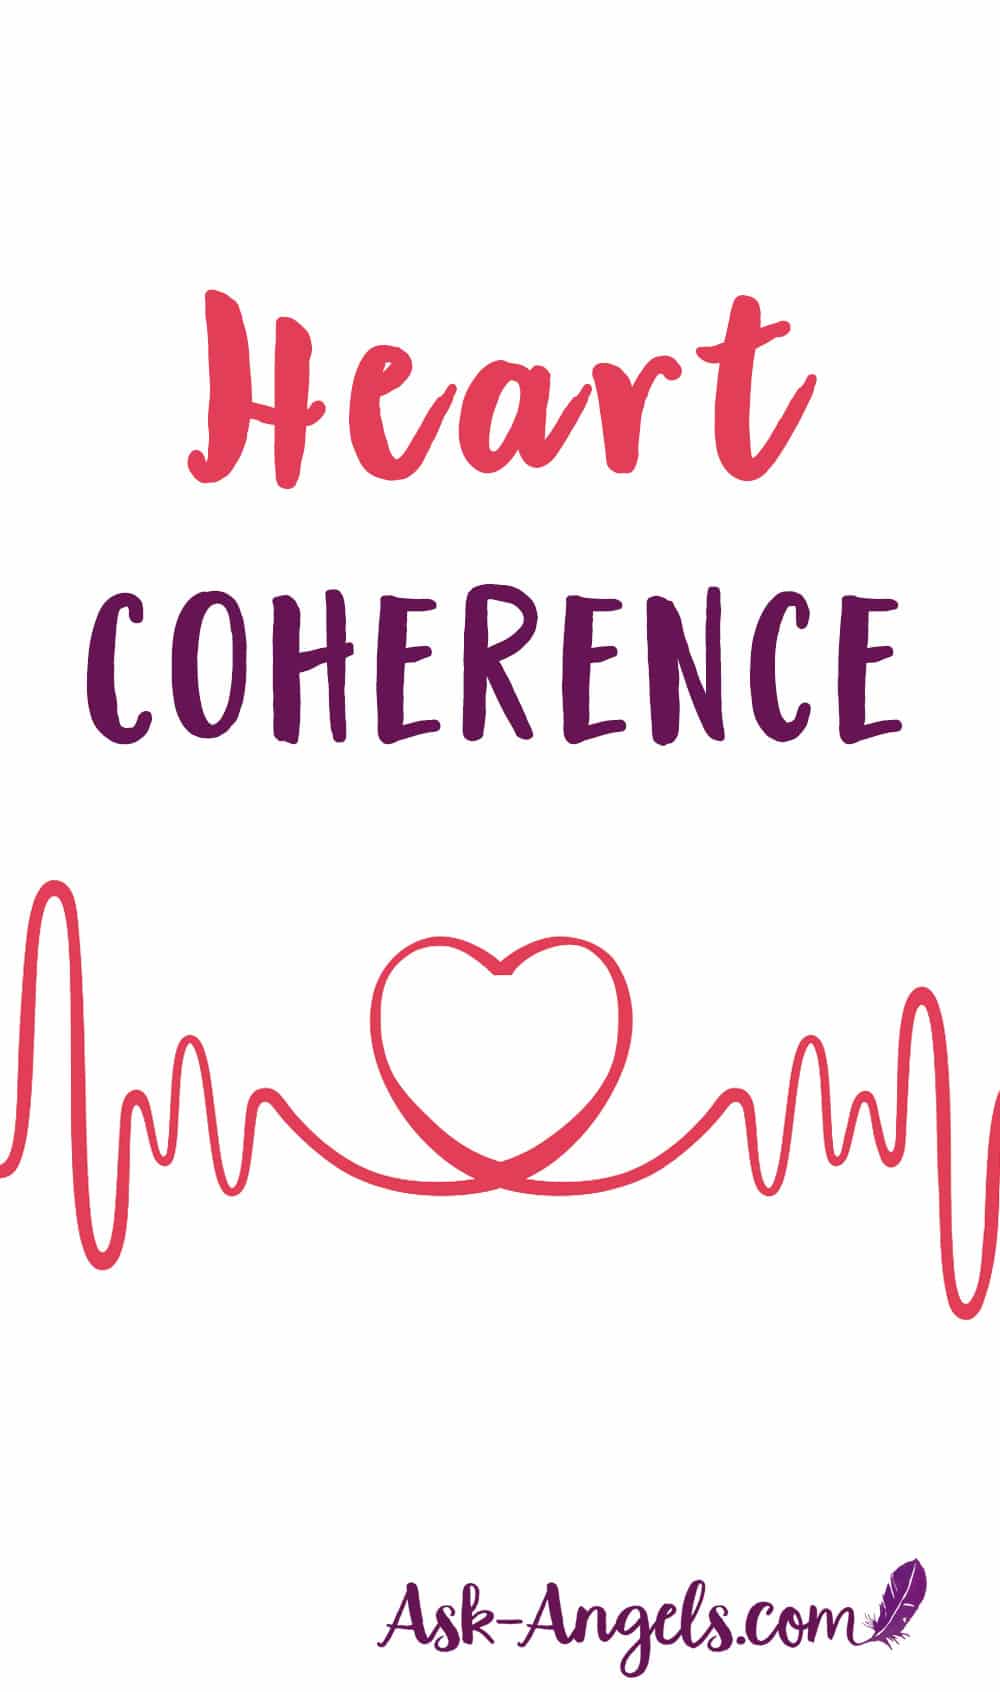 Heart Coherence